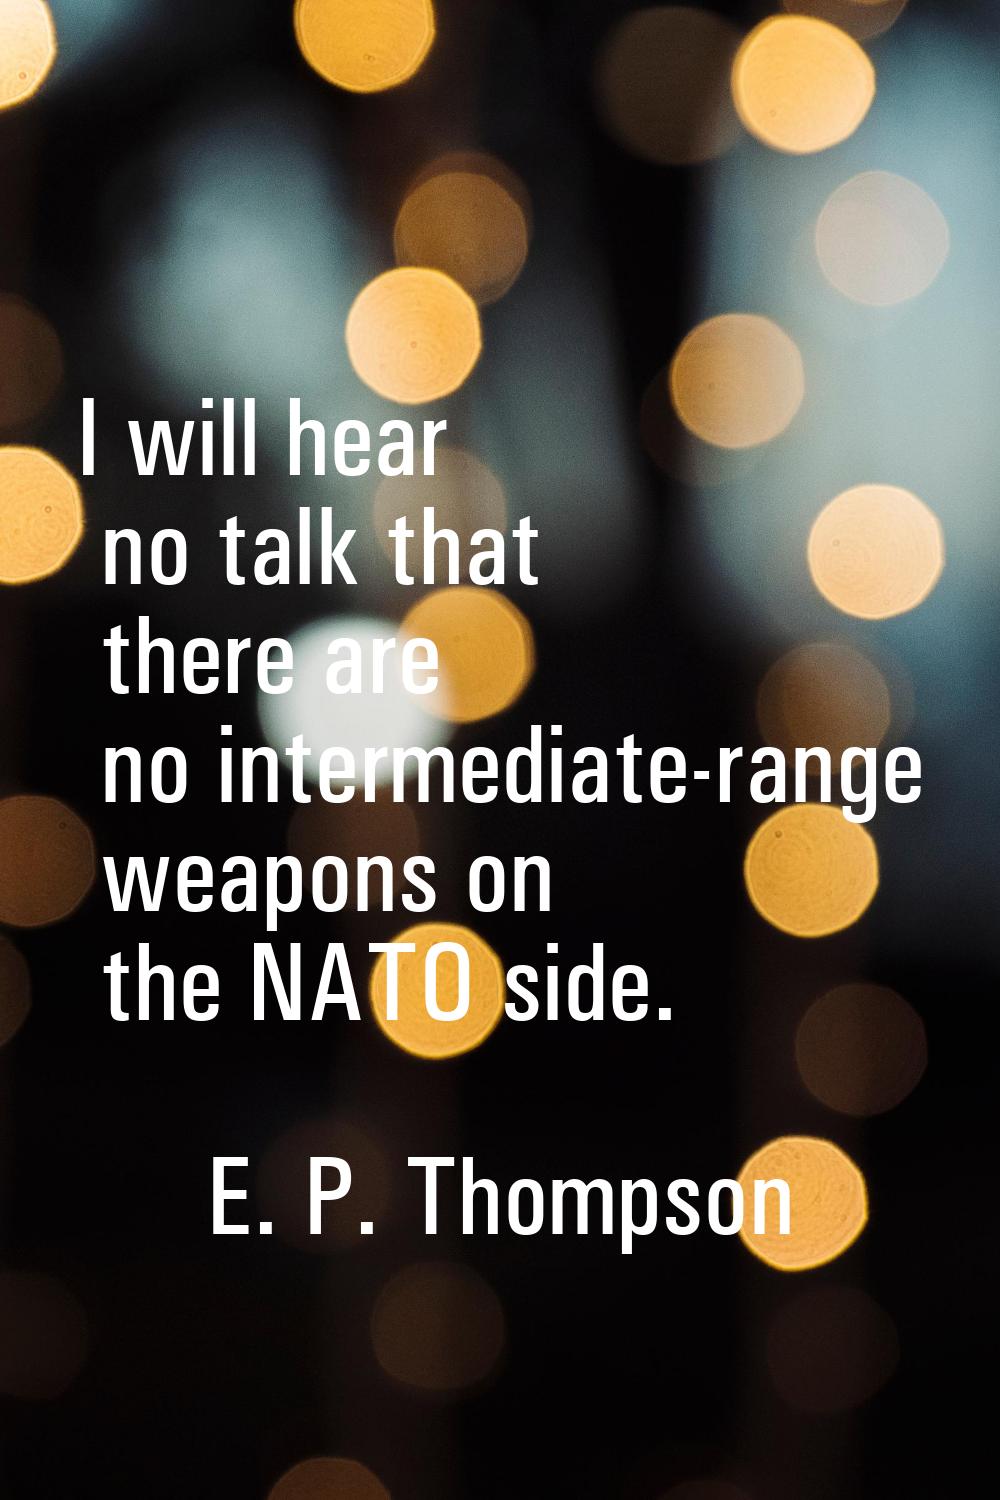 I will hear no talk that there are no intermediate-range weapons on the NATO side.